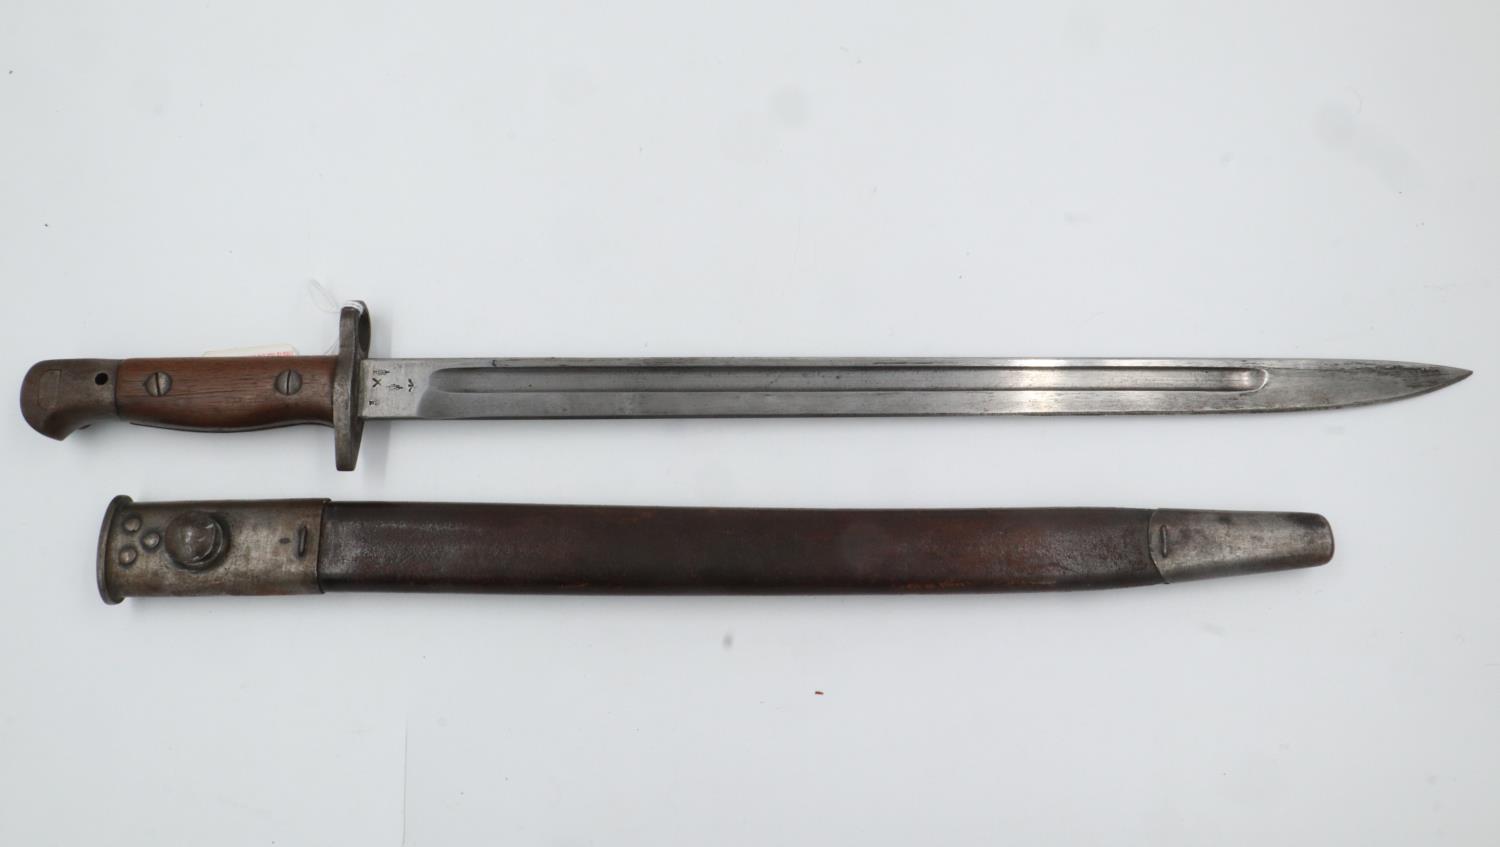 British WWI M1907 Sanderson bayonet, with metal mounted leather scabbard marked for Bussey & Co.